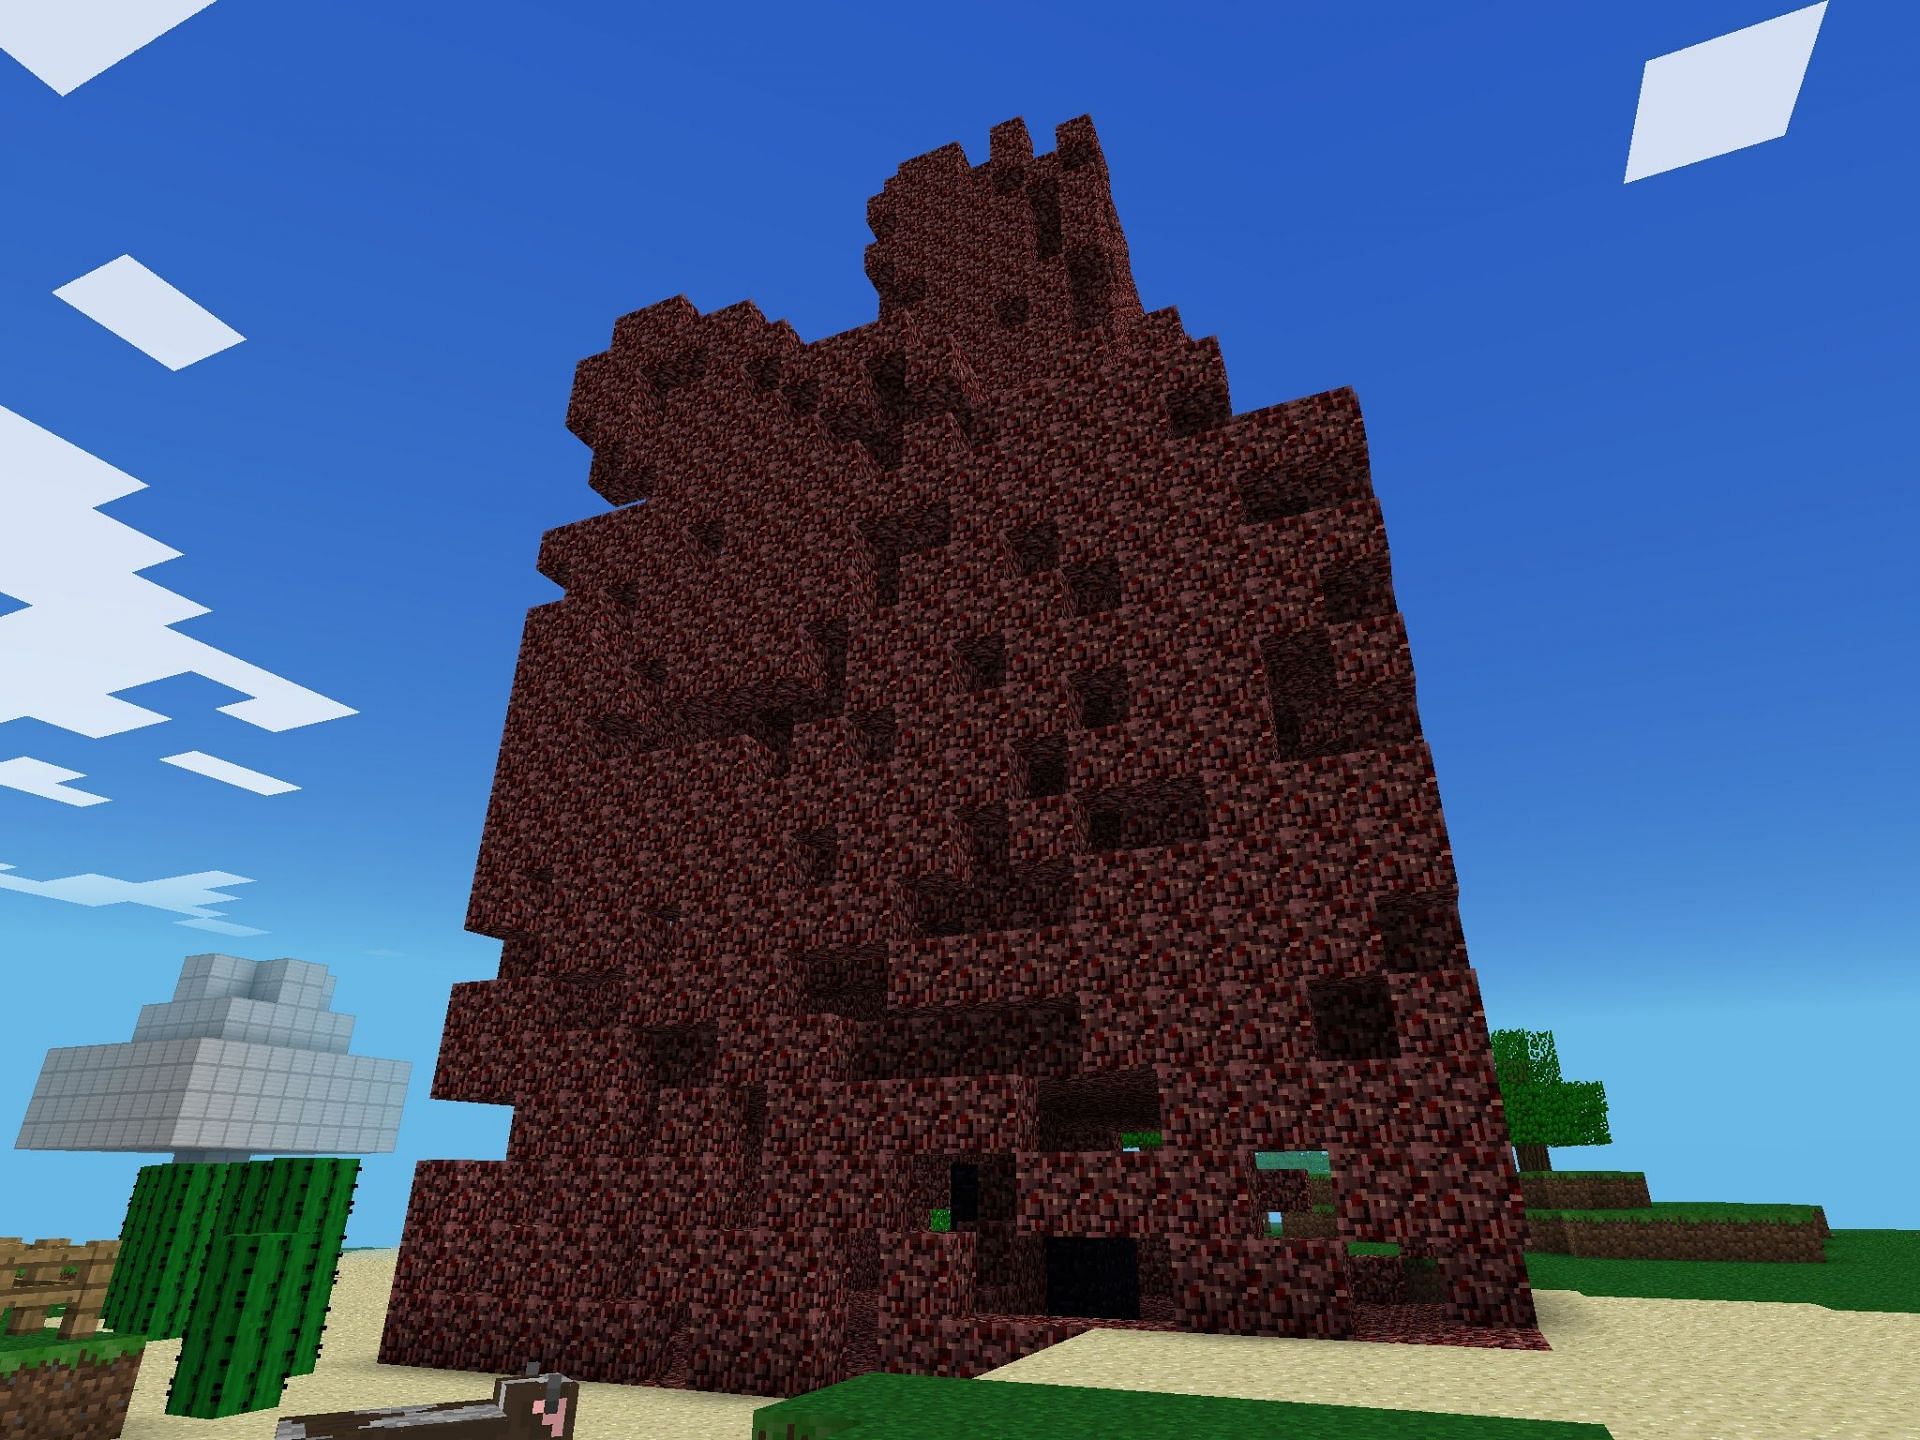 Obsolete since the 0.12 update, the Nether Spire was eventually replaced by the Nether itself (Image via Mojang)